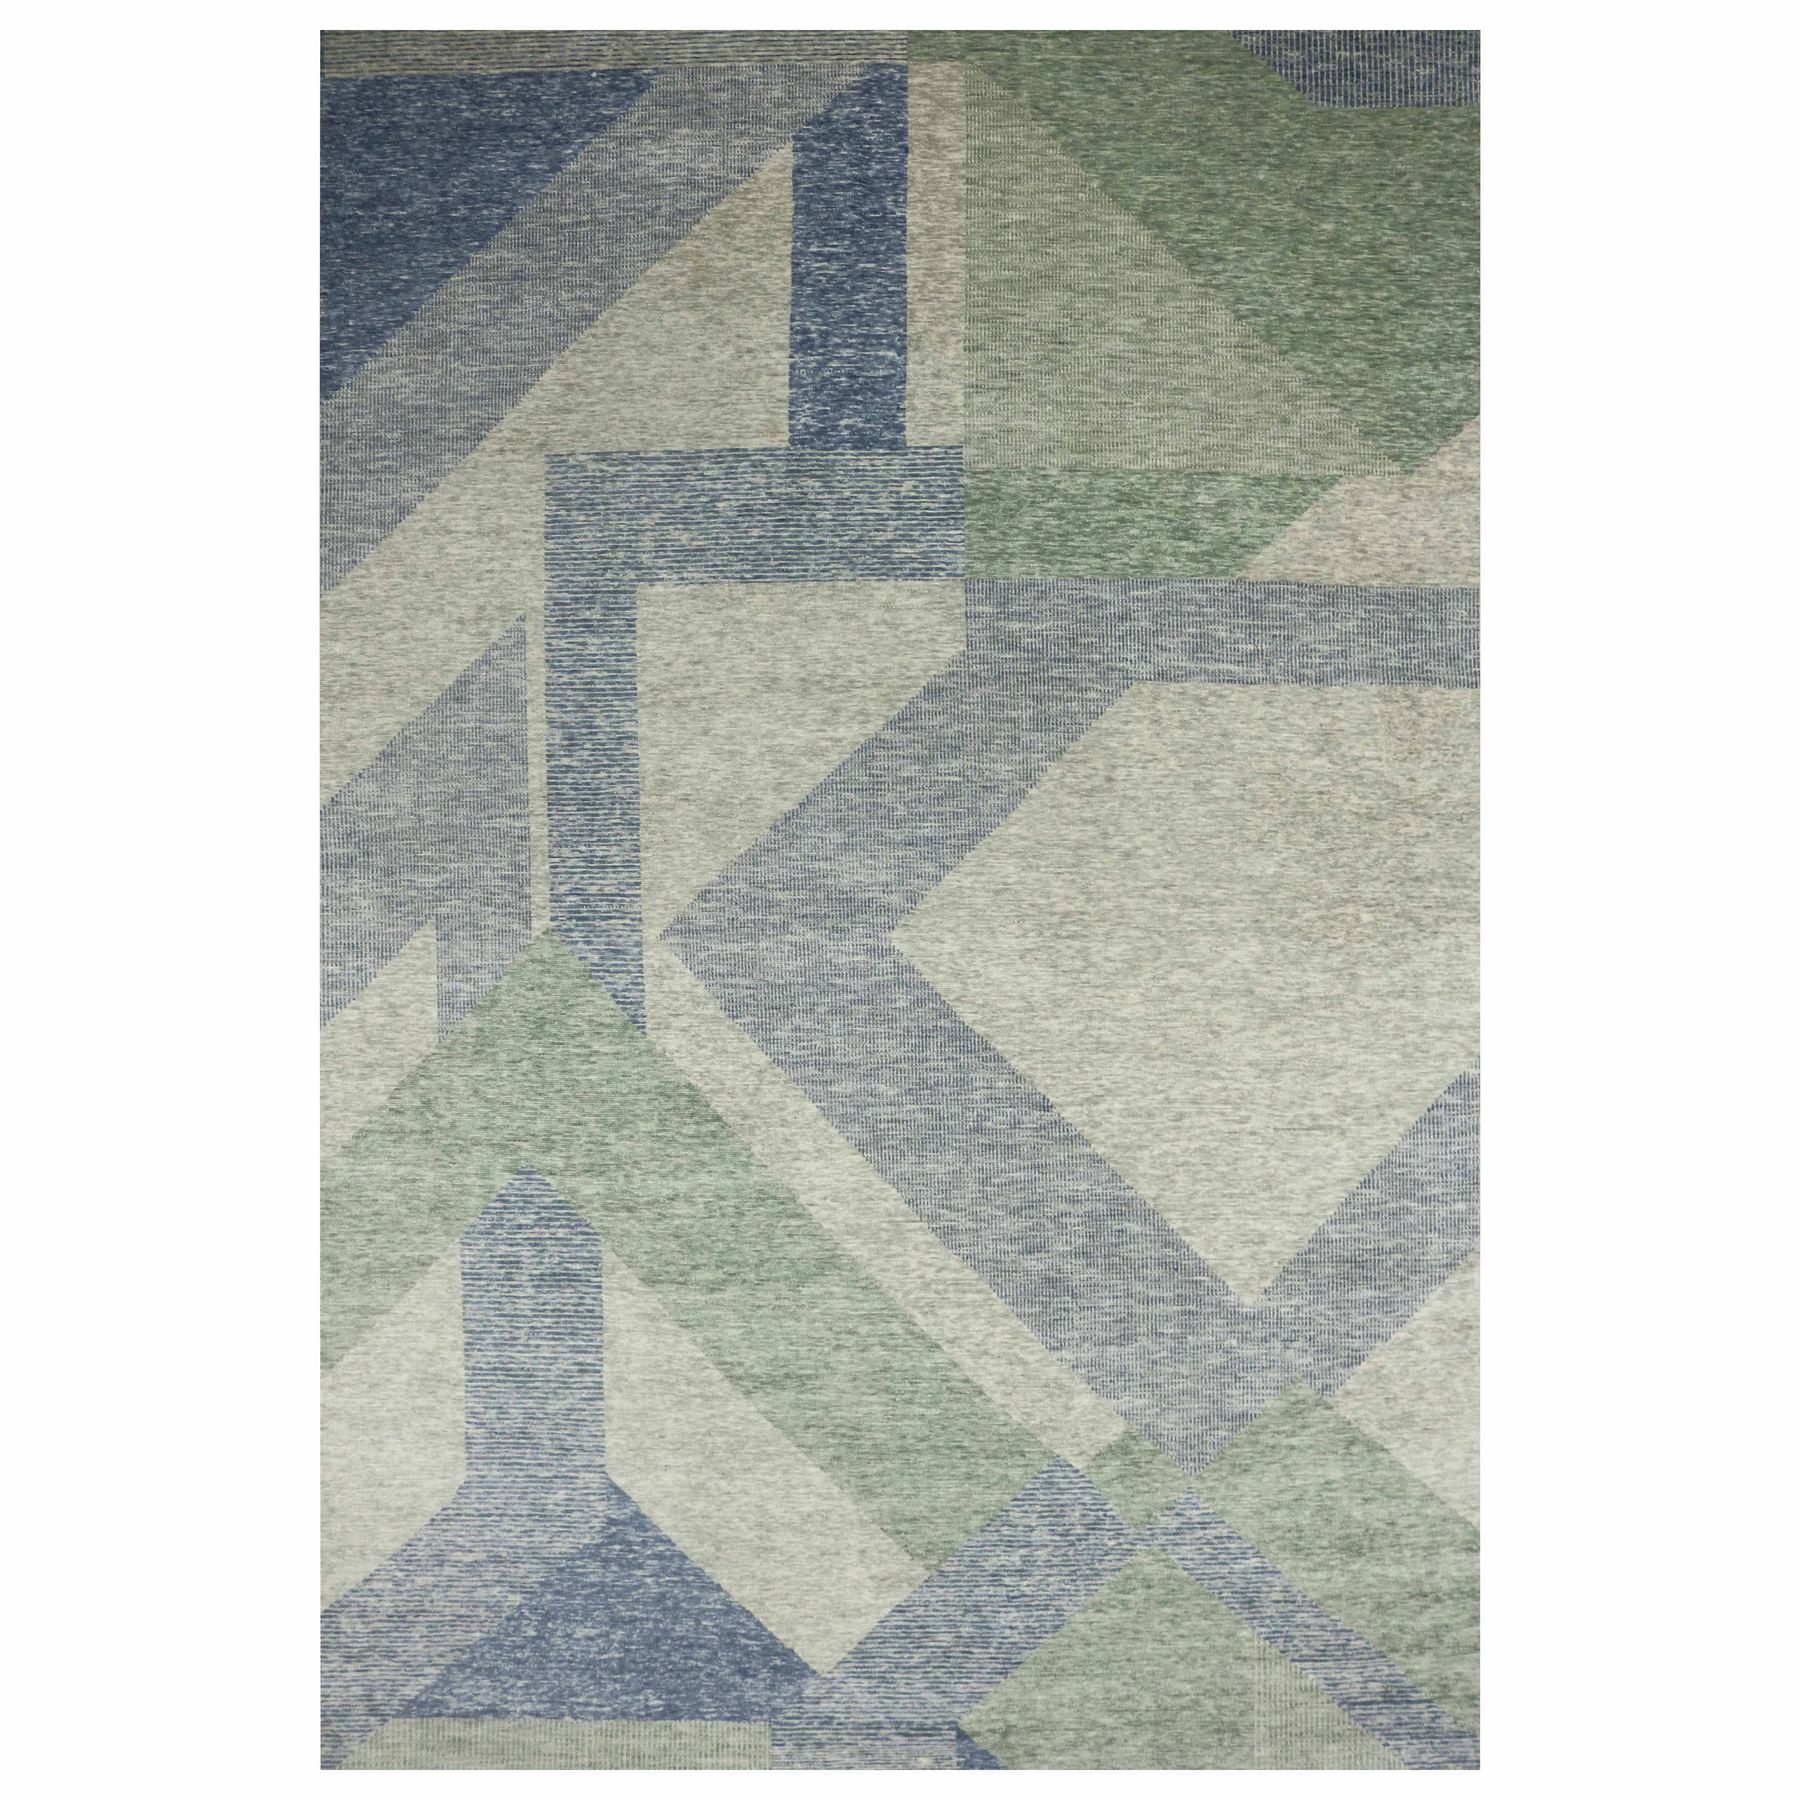  Wool Hand-Knotted Area Rug 12'2